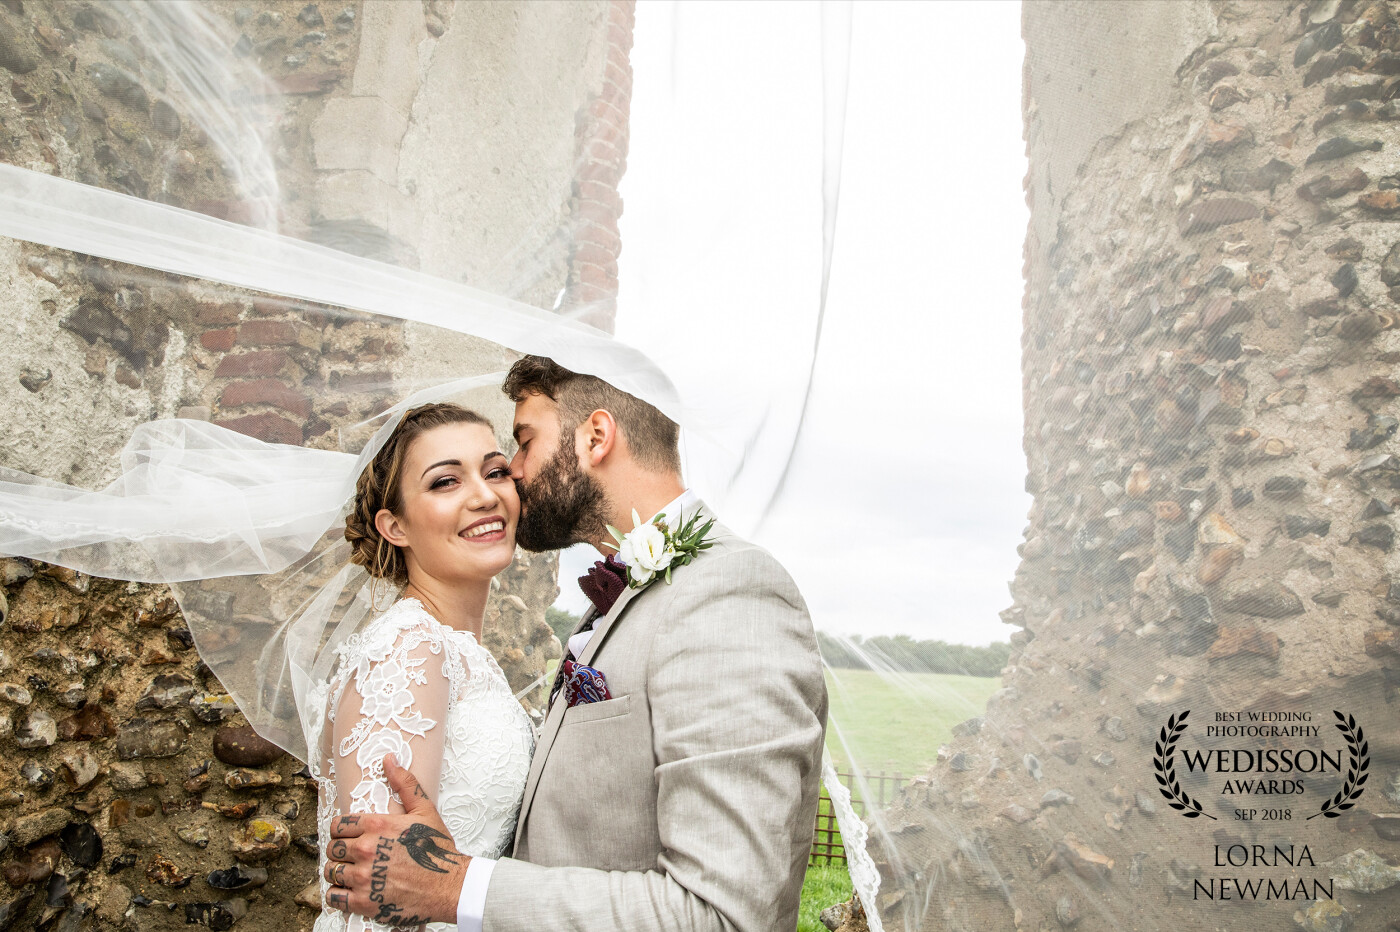 Taken at the abandoned medieval ruins at the lovely Godwick Hall and Great Barn. Beautiful Ashleigh & James Izzo had the perfect wedding day in Norfolk last month.